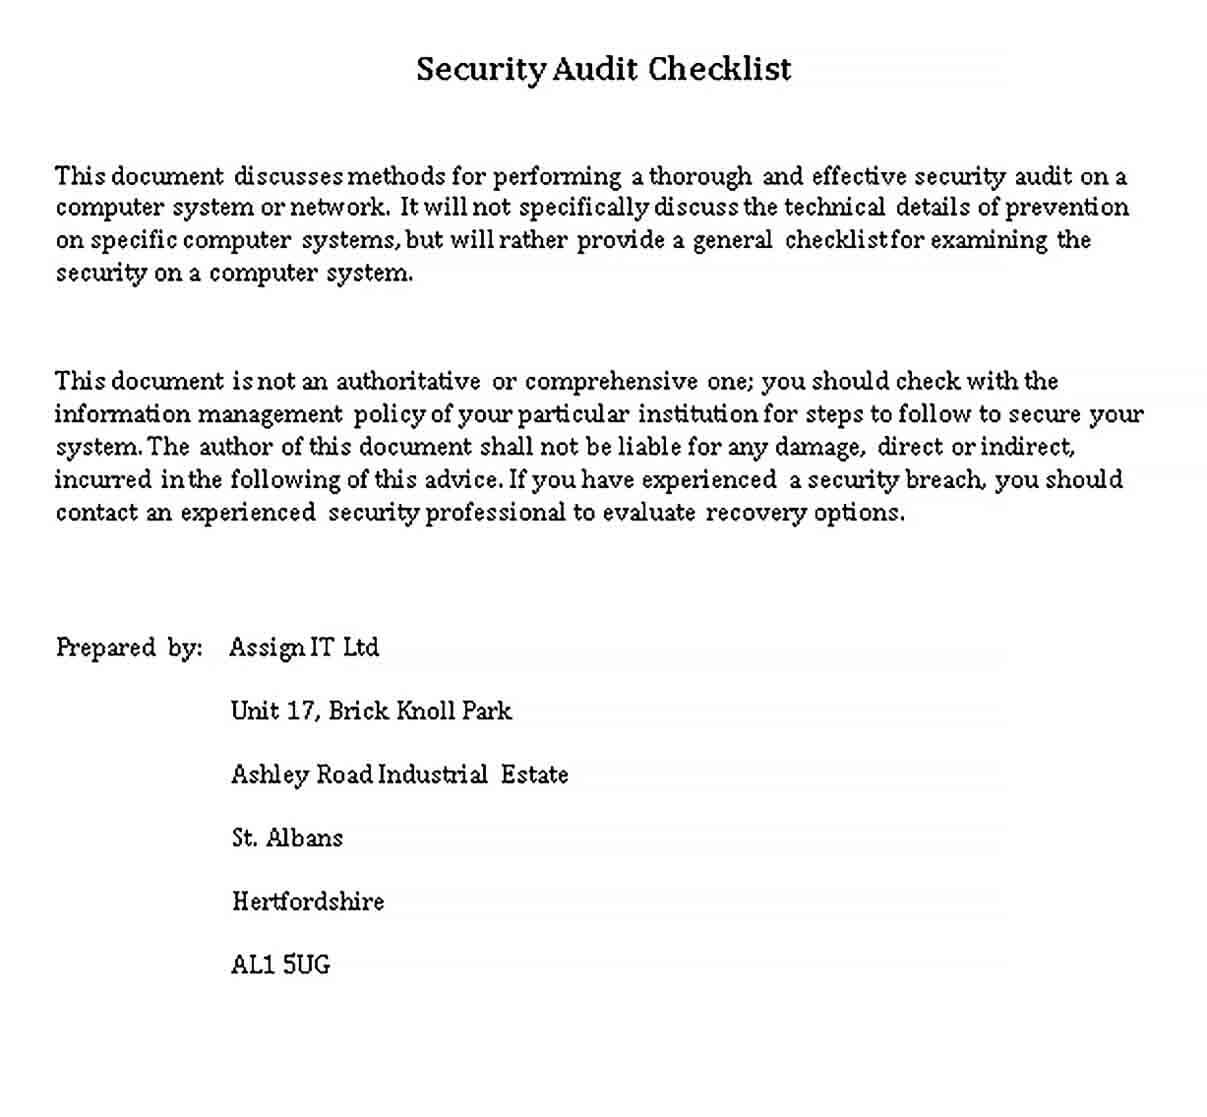 Sample Security Audit Checklist Template